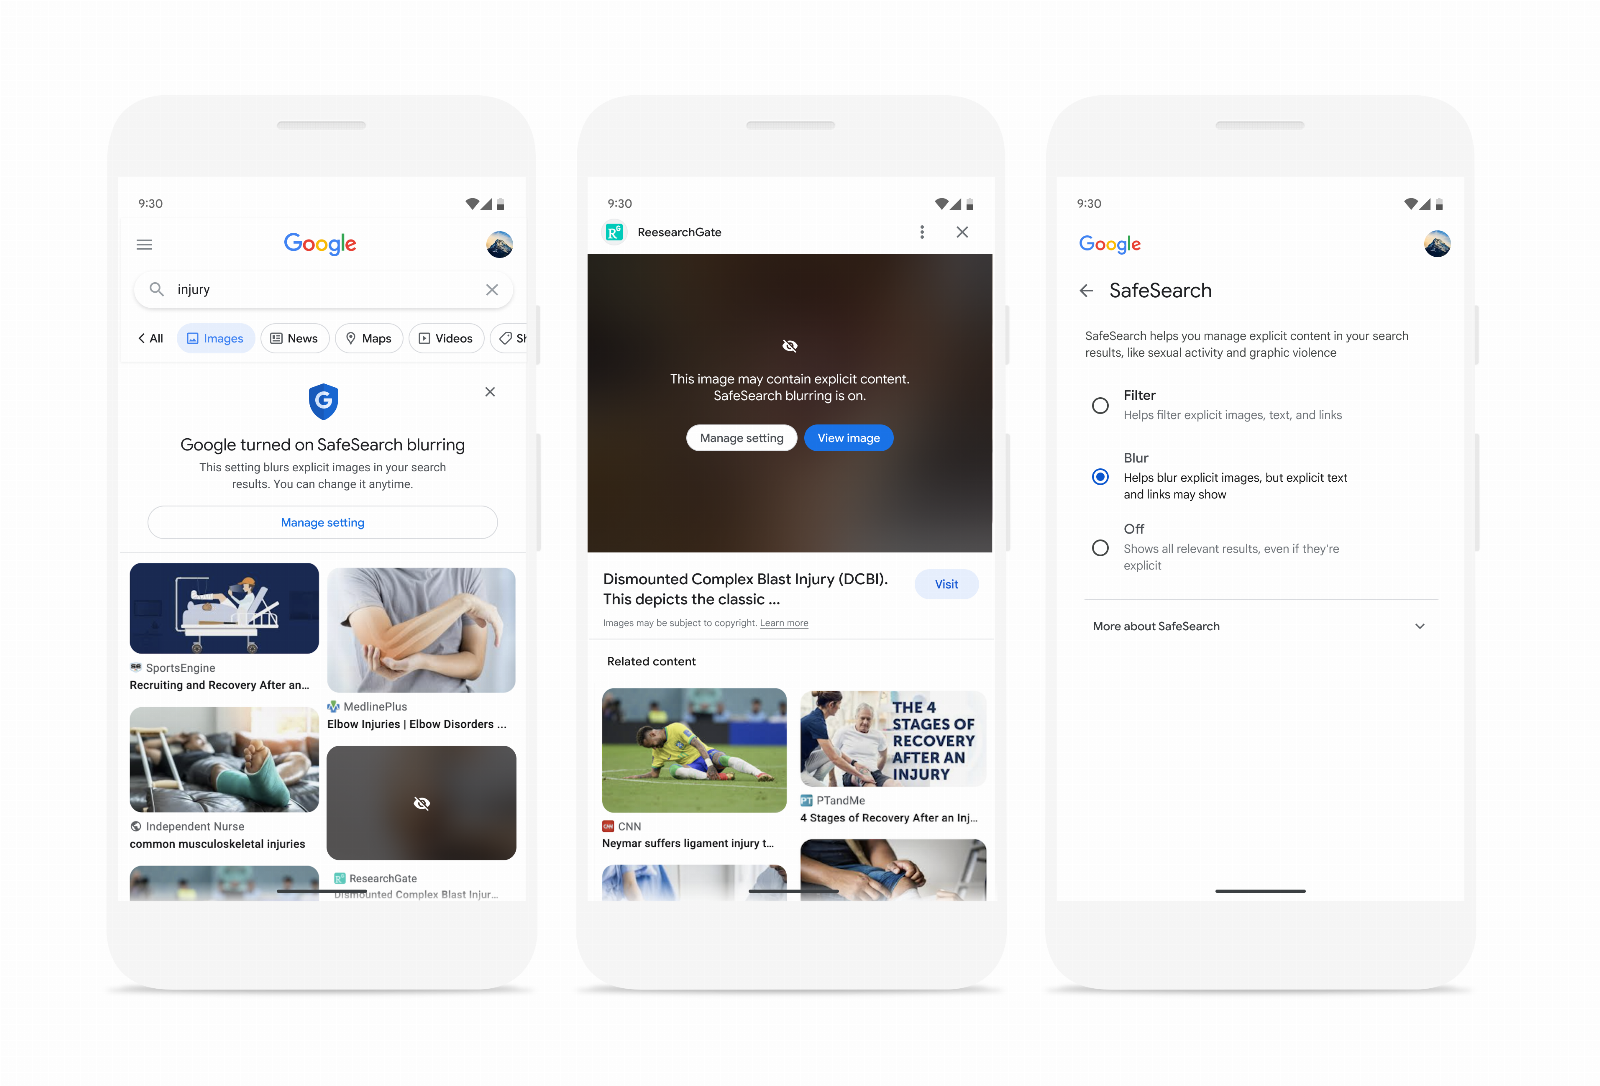 Google will soon blur explicit imagery in Search results by default